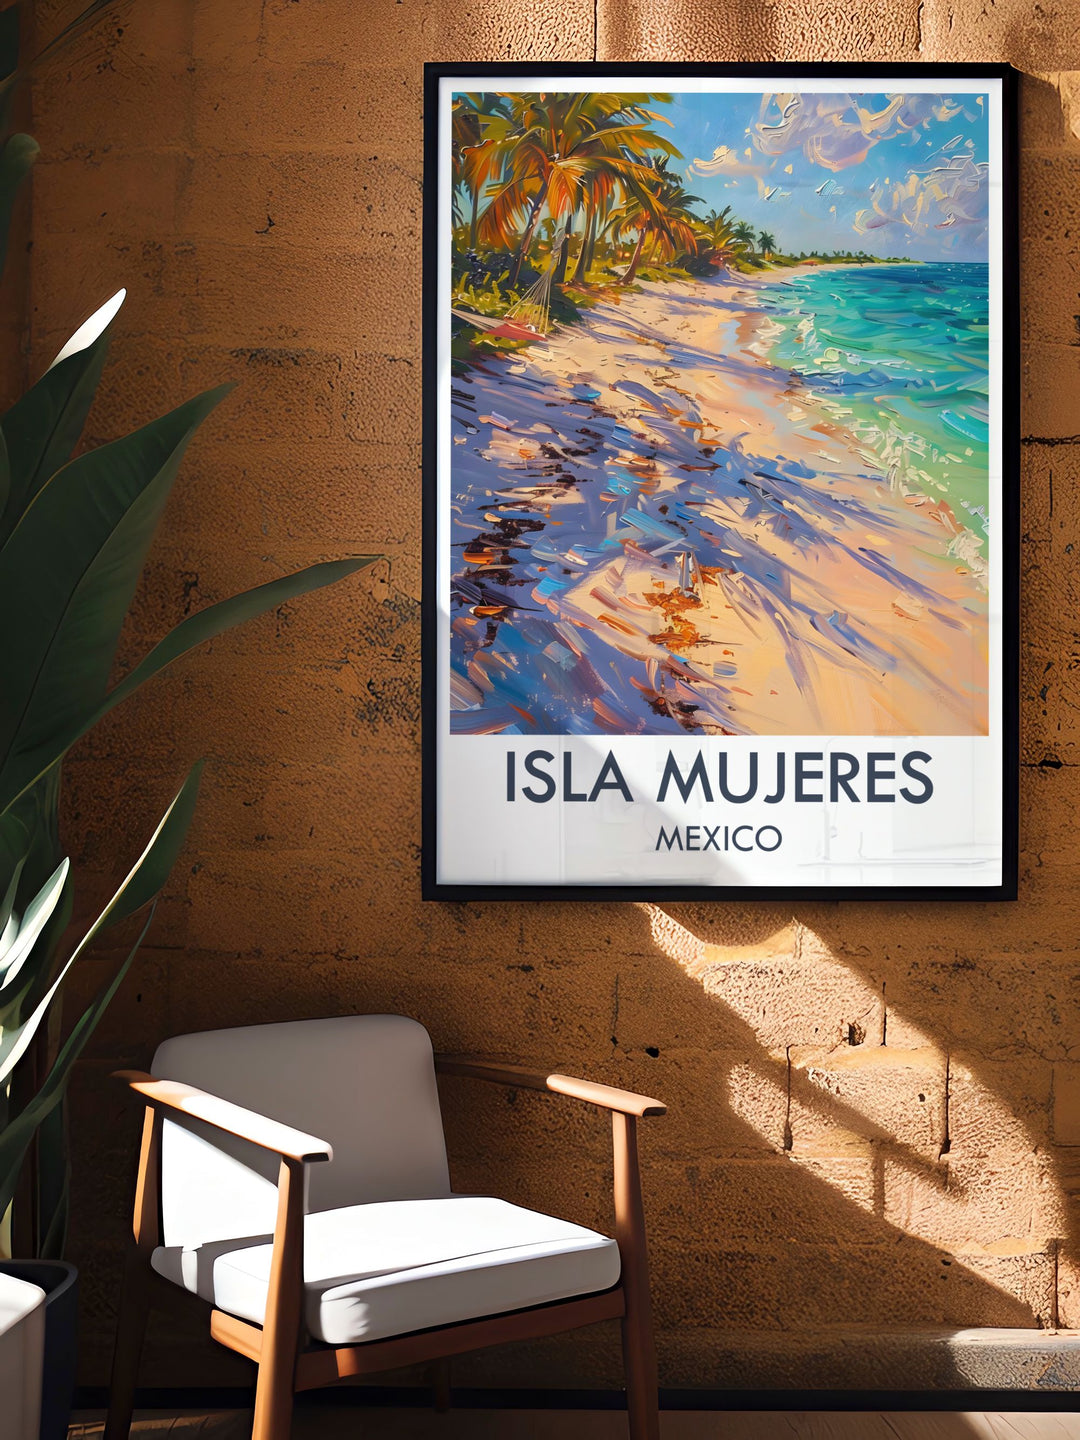 Travel poster of Playa Norte, capturing the beachs peaceful ambiance and natural beauty, surrounded by the turquoise waters of the Caribbean Sea.